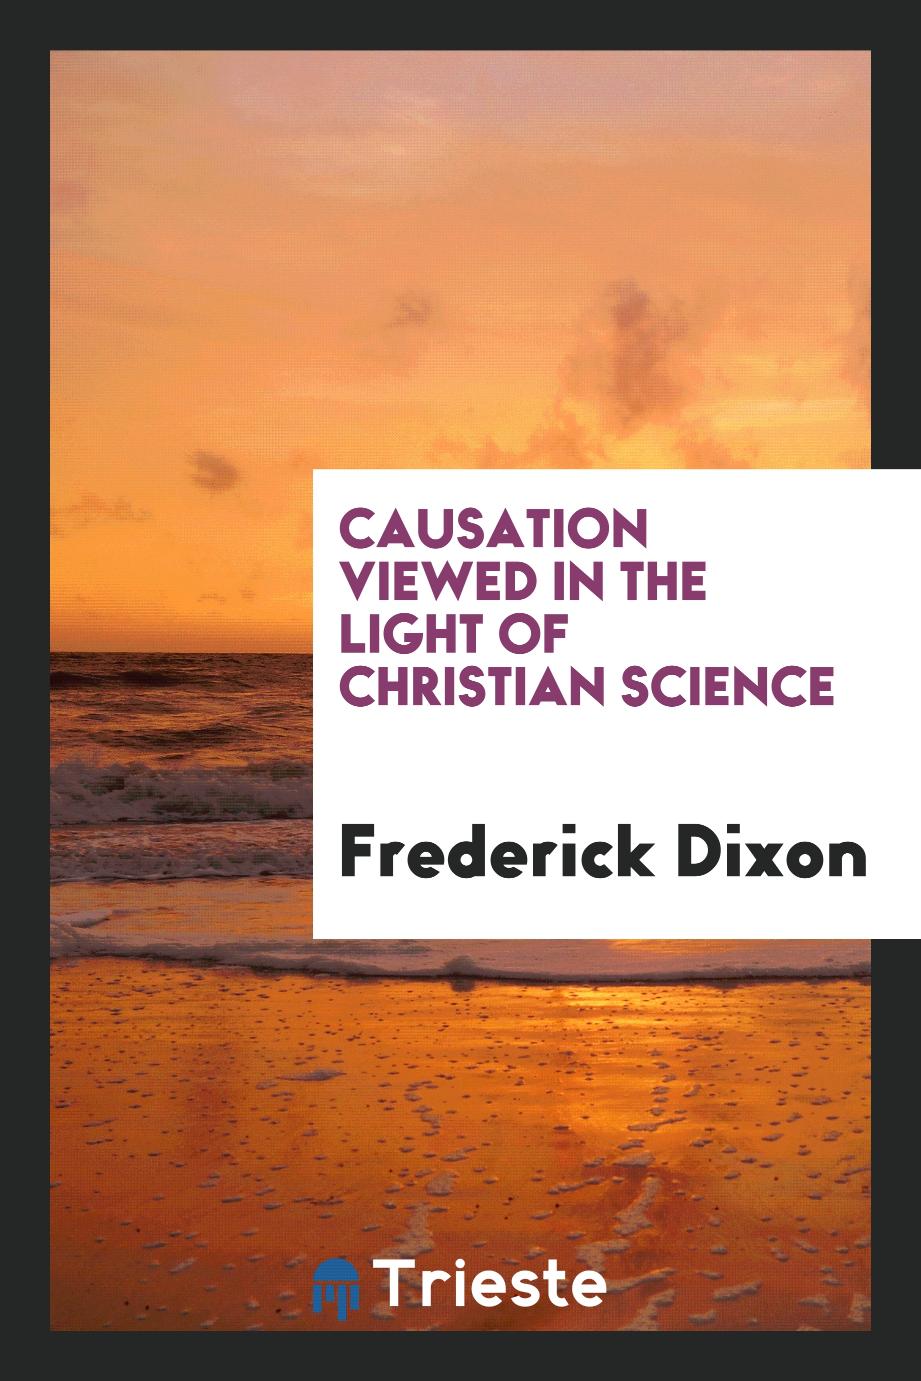 Causation viewed in the light of Christian Science